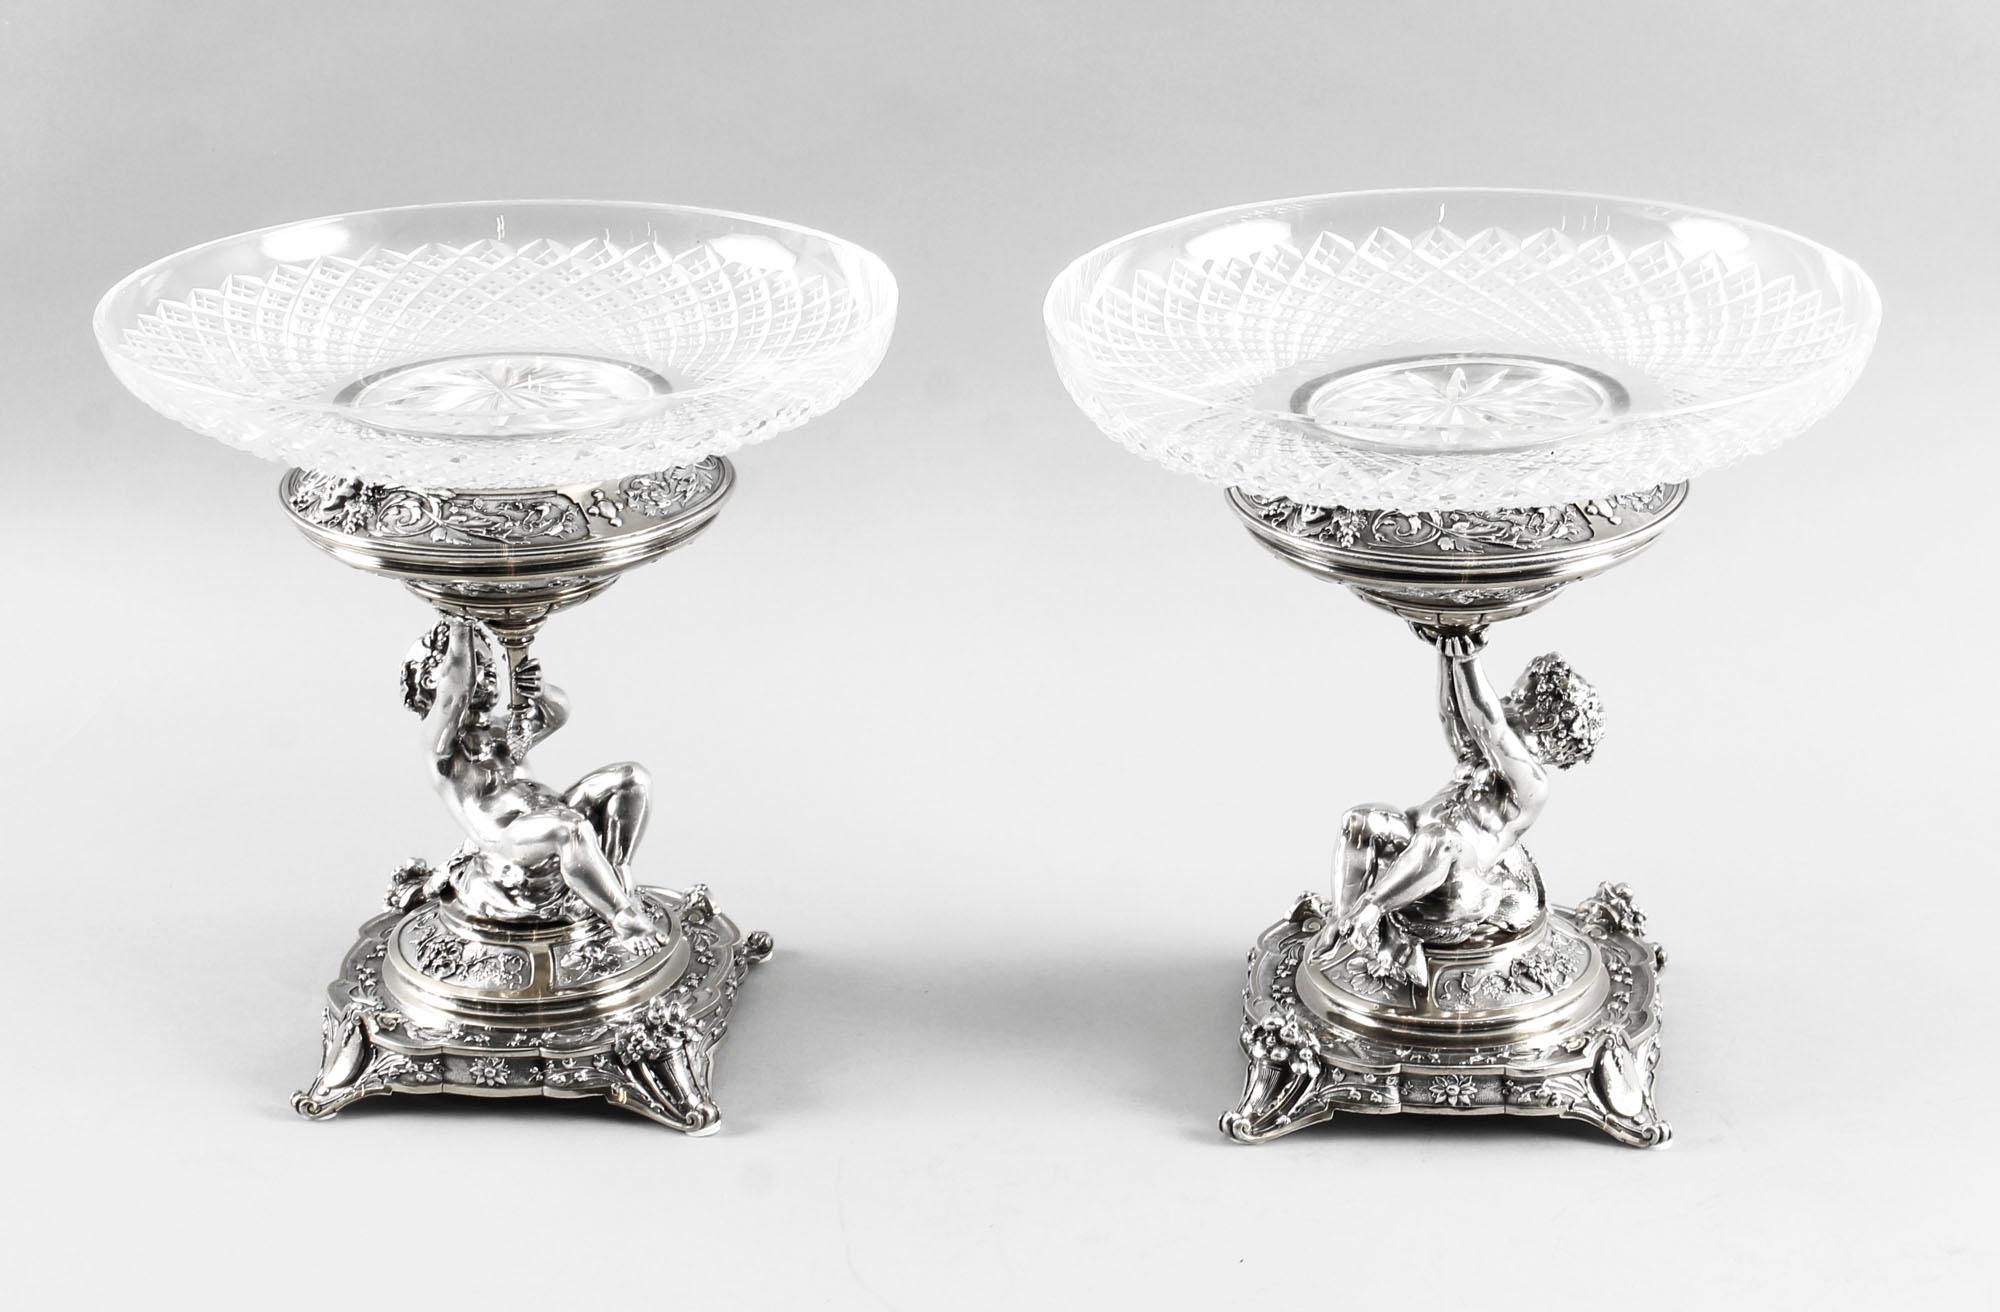 This is an intricate and exquisitely made antique pair of English Victorian parcel gilt silver plated and cut glass centrepieces by the renowned silversmiths Elkington & Co., dated 1883.
 
Each of these stunning centrepieces has a wonderful